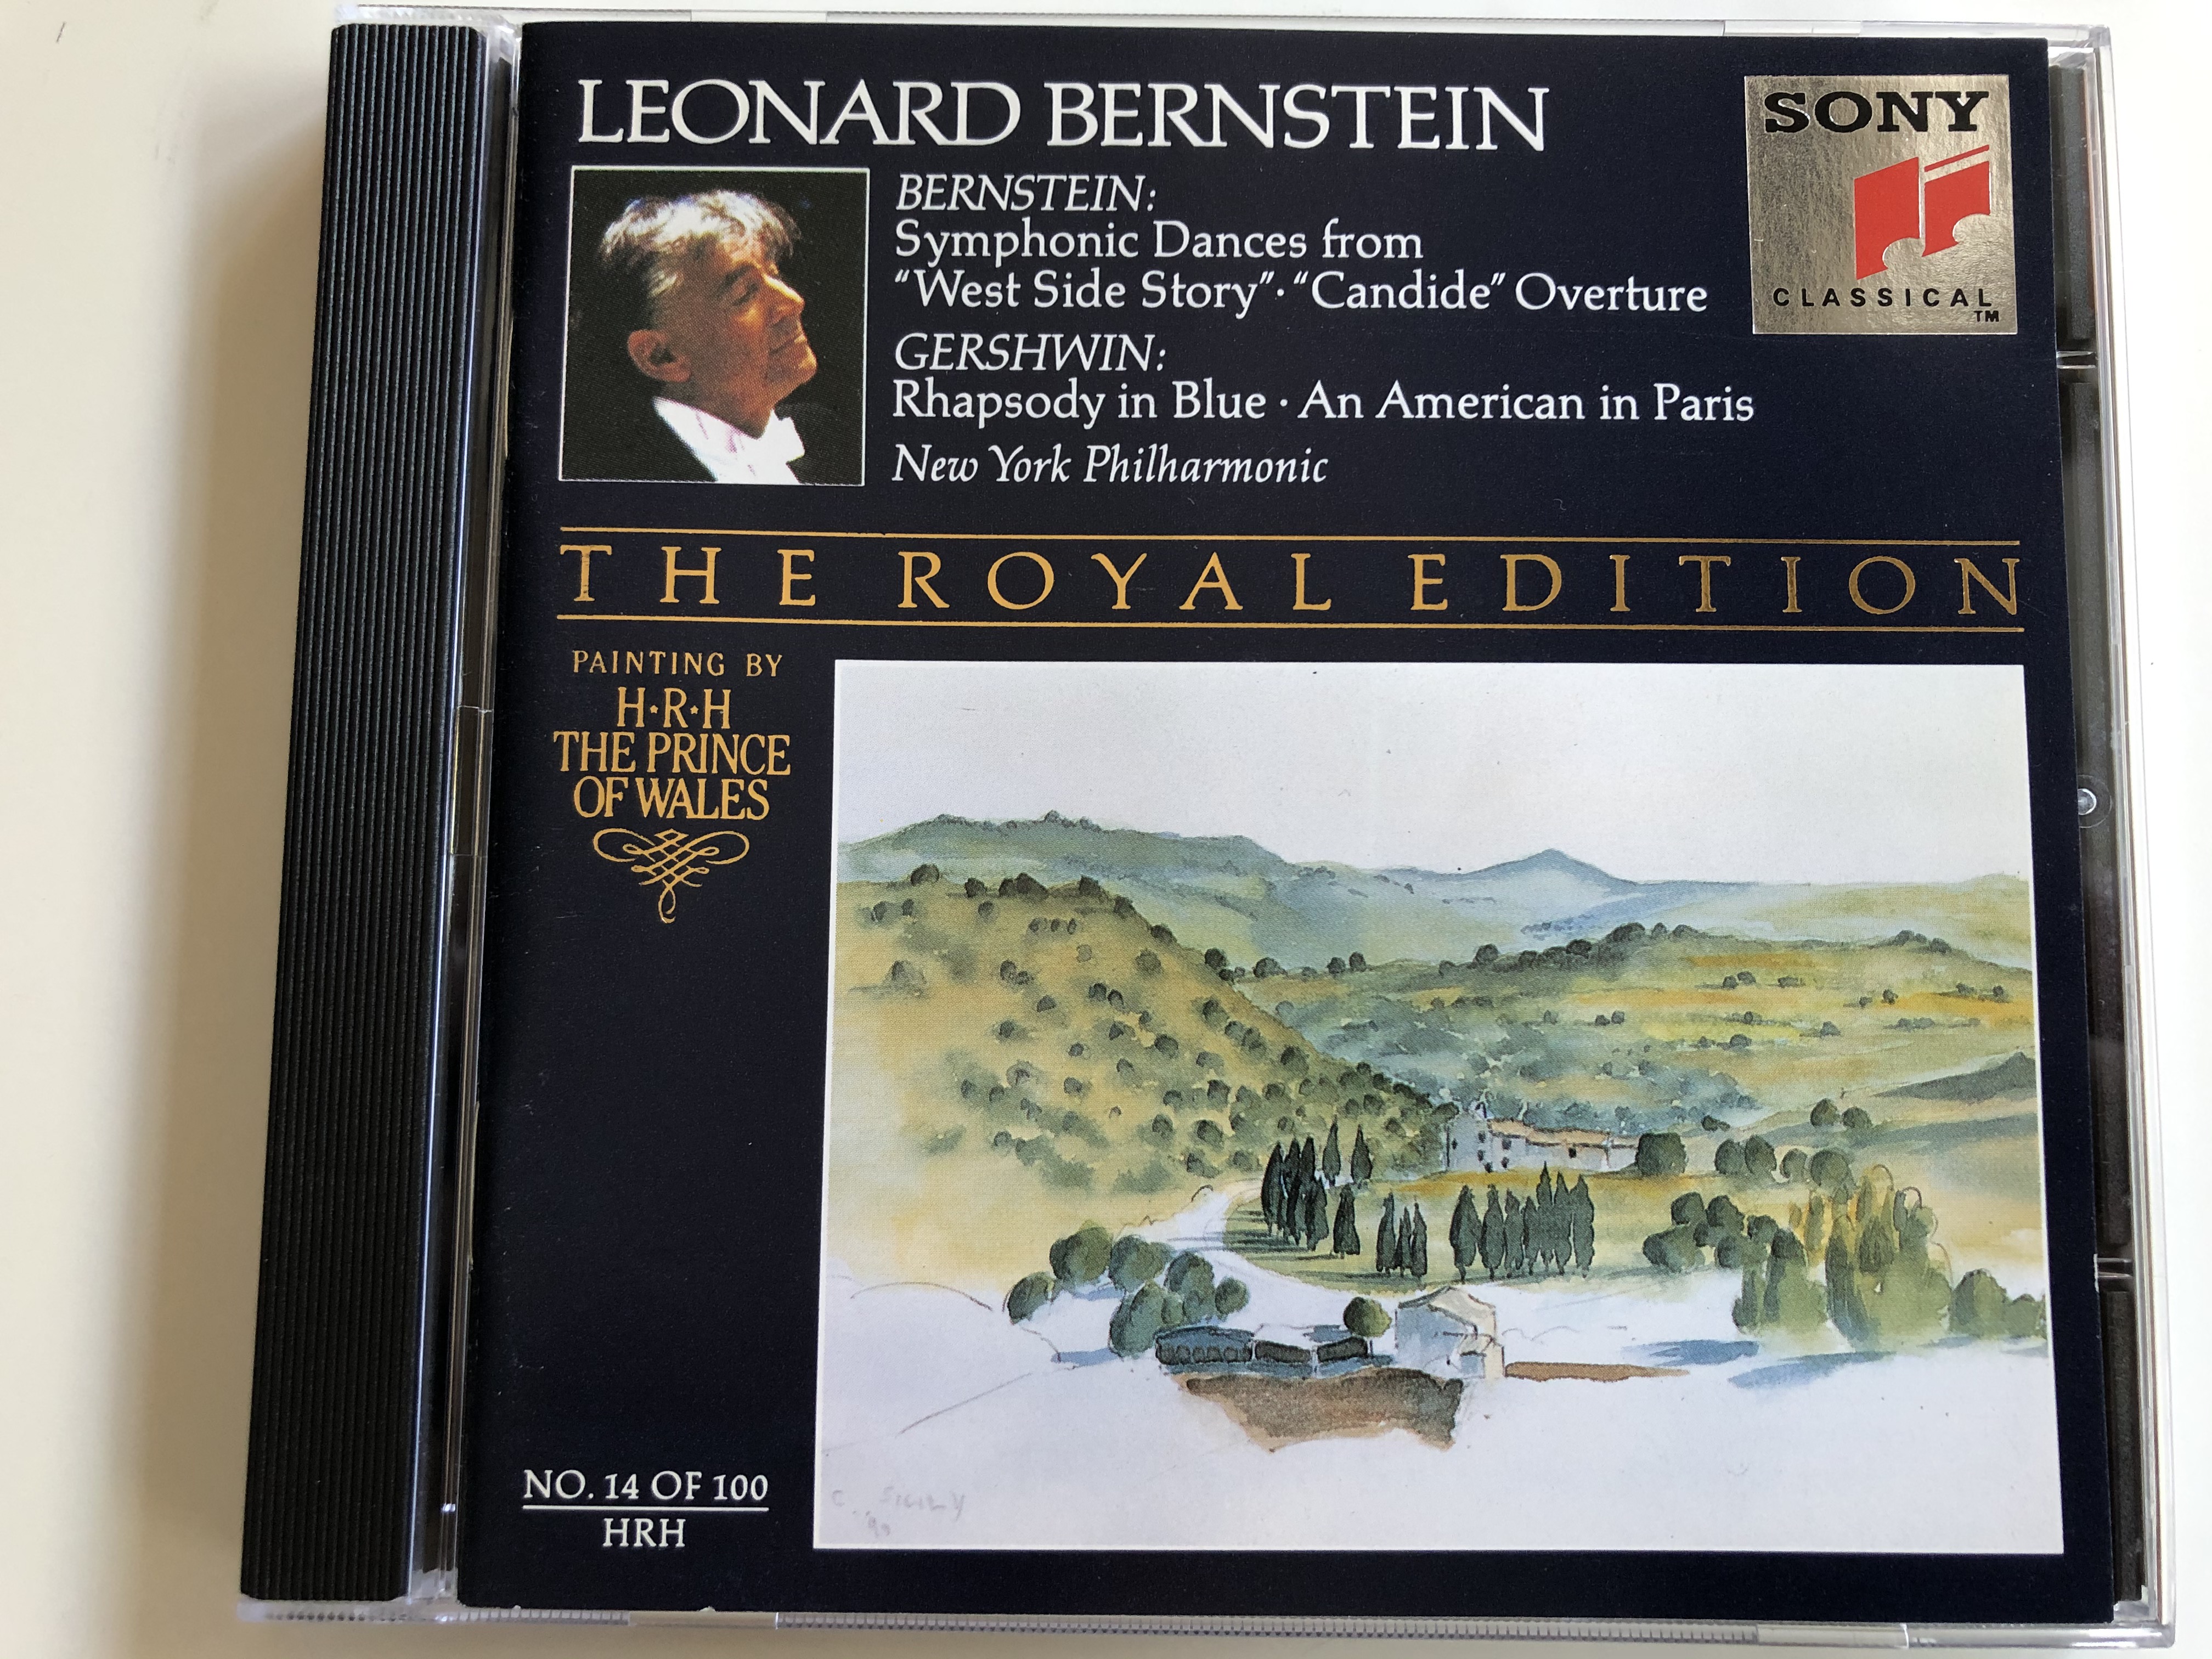 Leonard Bernstein ‎– Symphonic Dances from ''West Side Story'', ''Candide''  Overture / Gershwin - Rhapsody in Blue, An American in Paris / New York  Philharmonic / The Royal Edition / Sony Classical ‎Audio CD / SMK 47529 -  bibleinmylanguage